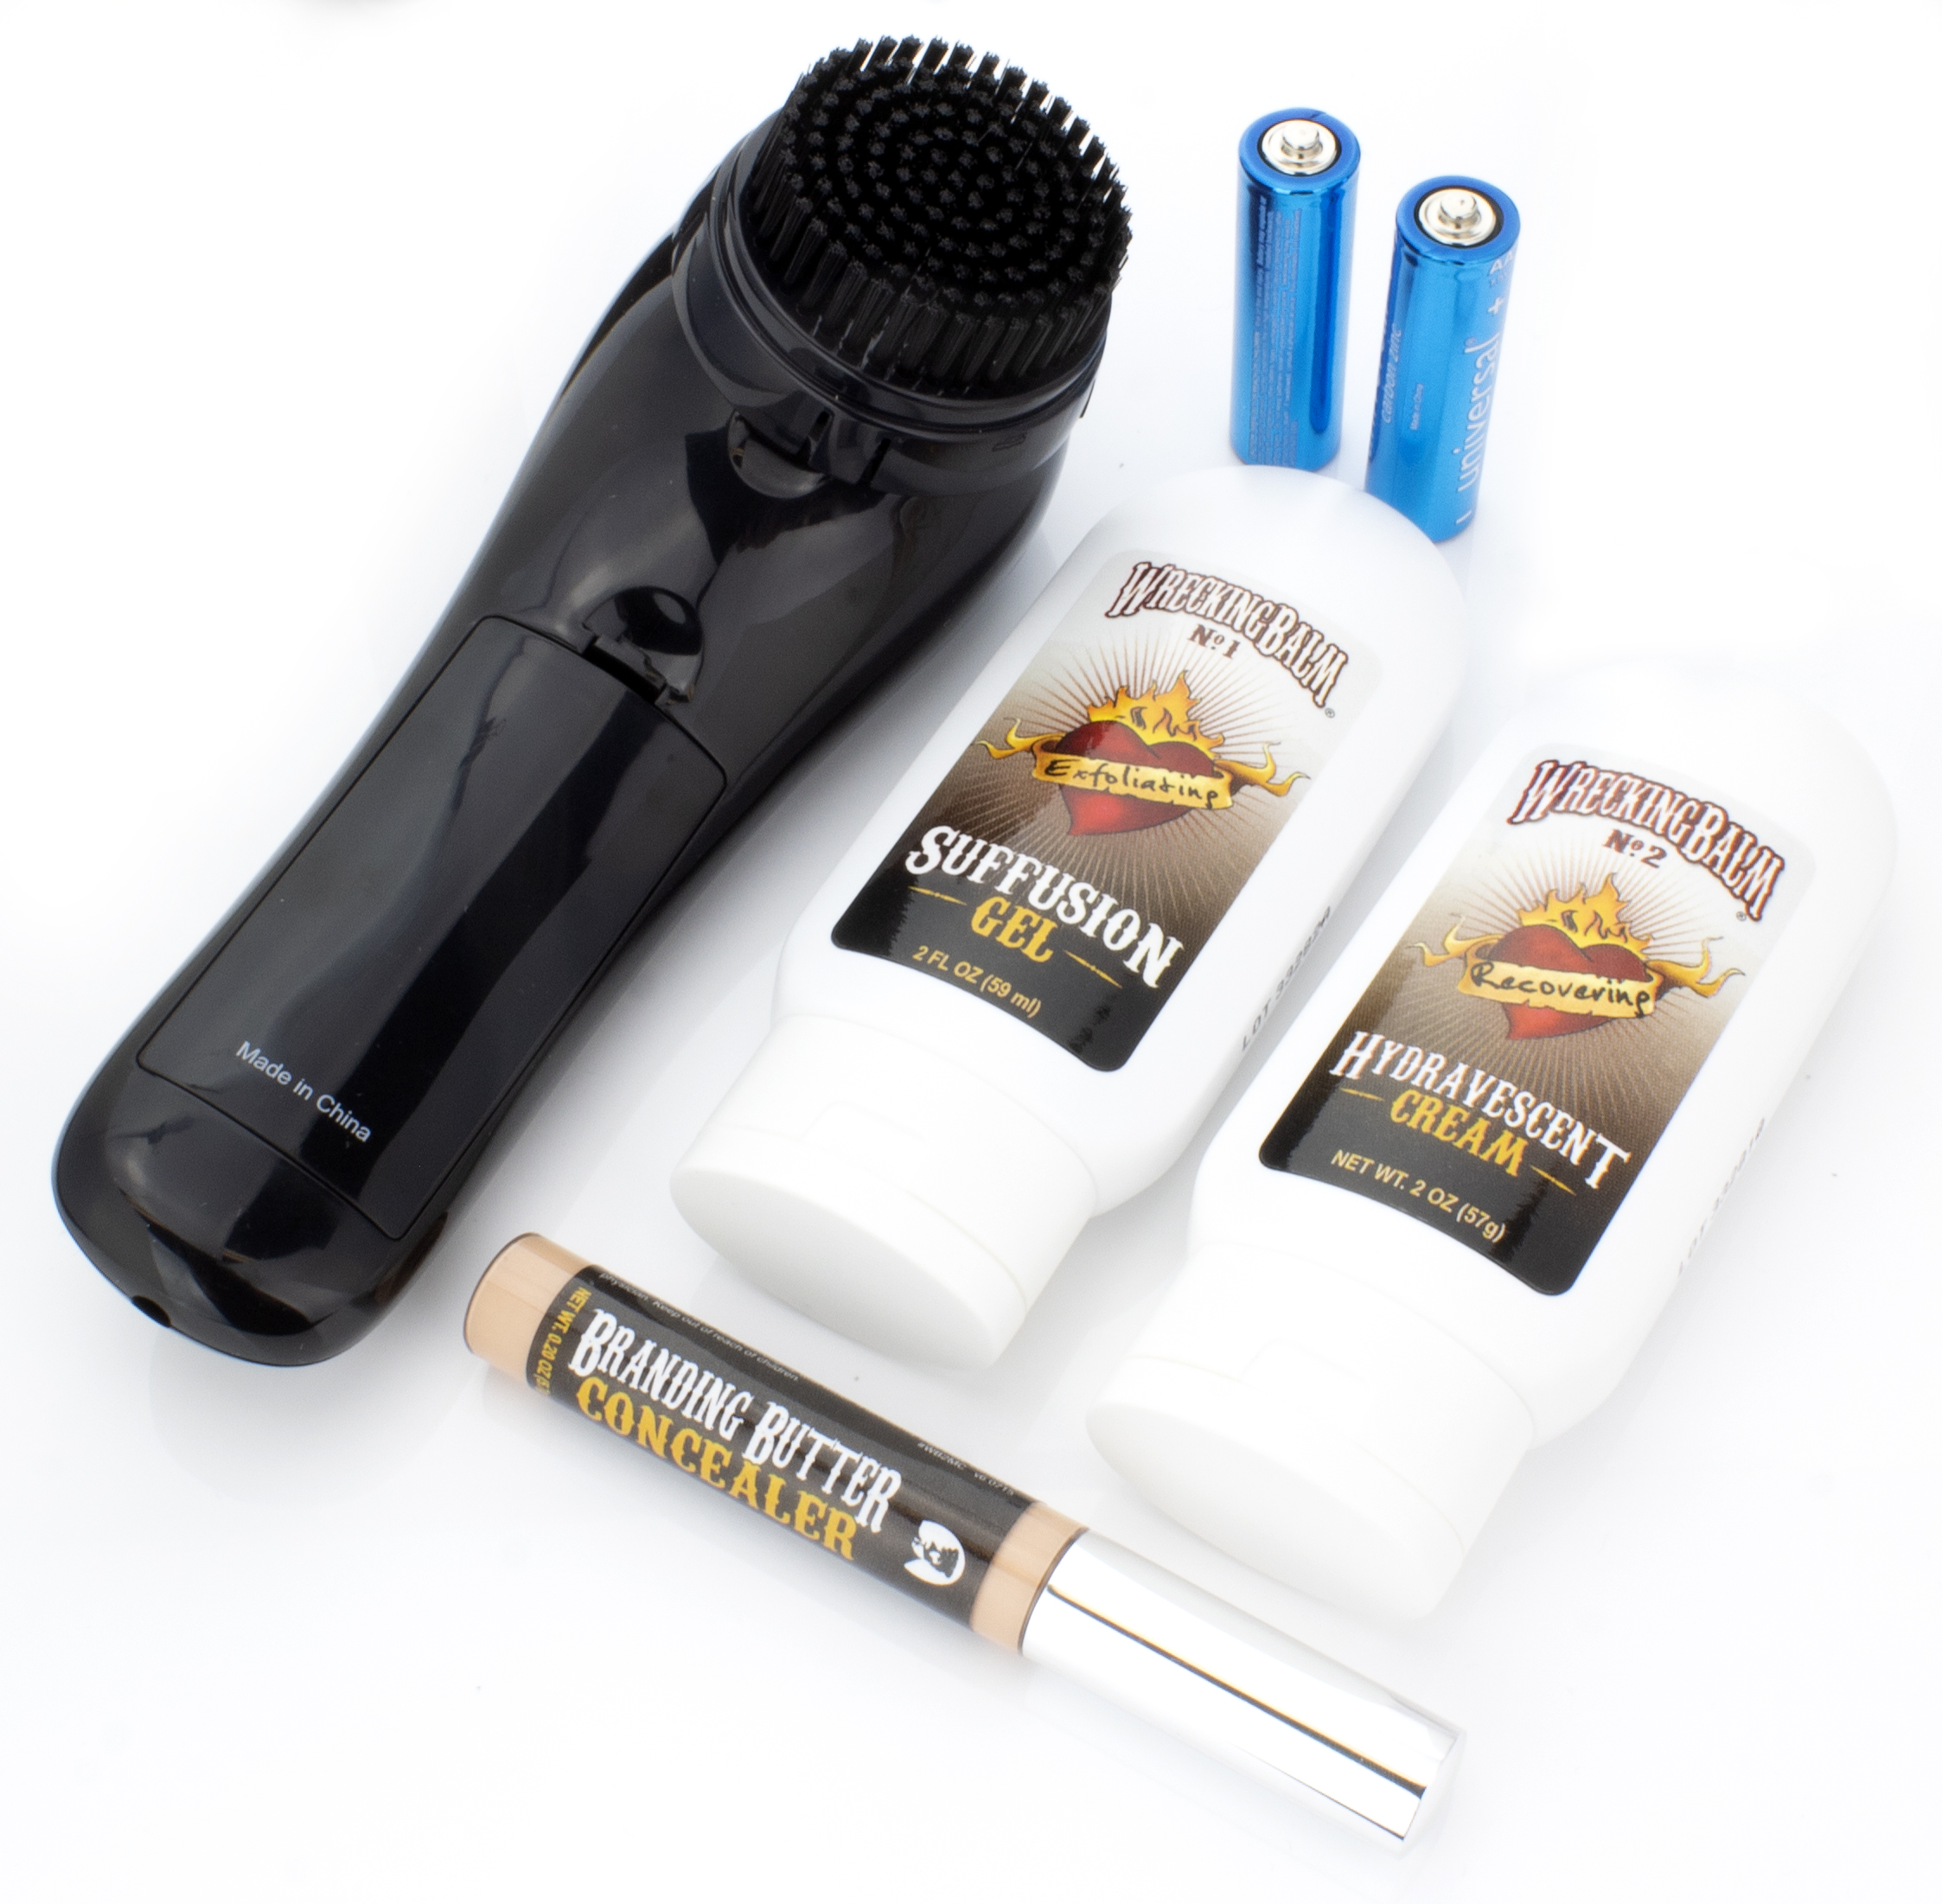 Wrecking Balm Tattoo Removal System to Fade Tattoos At Home Kit New.